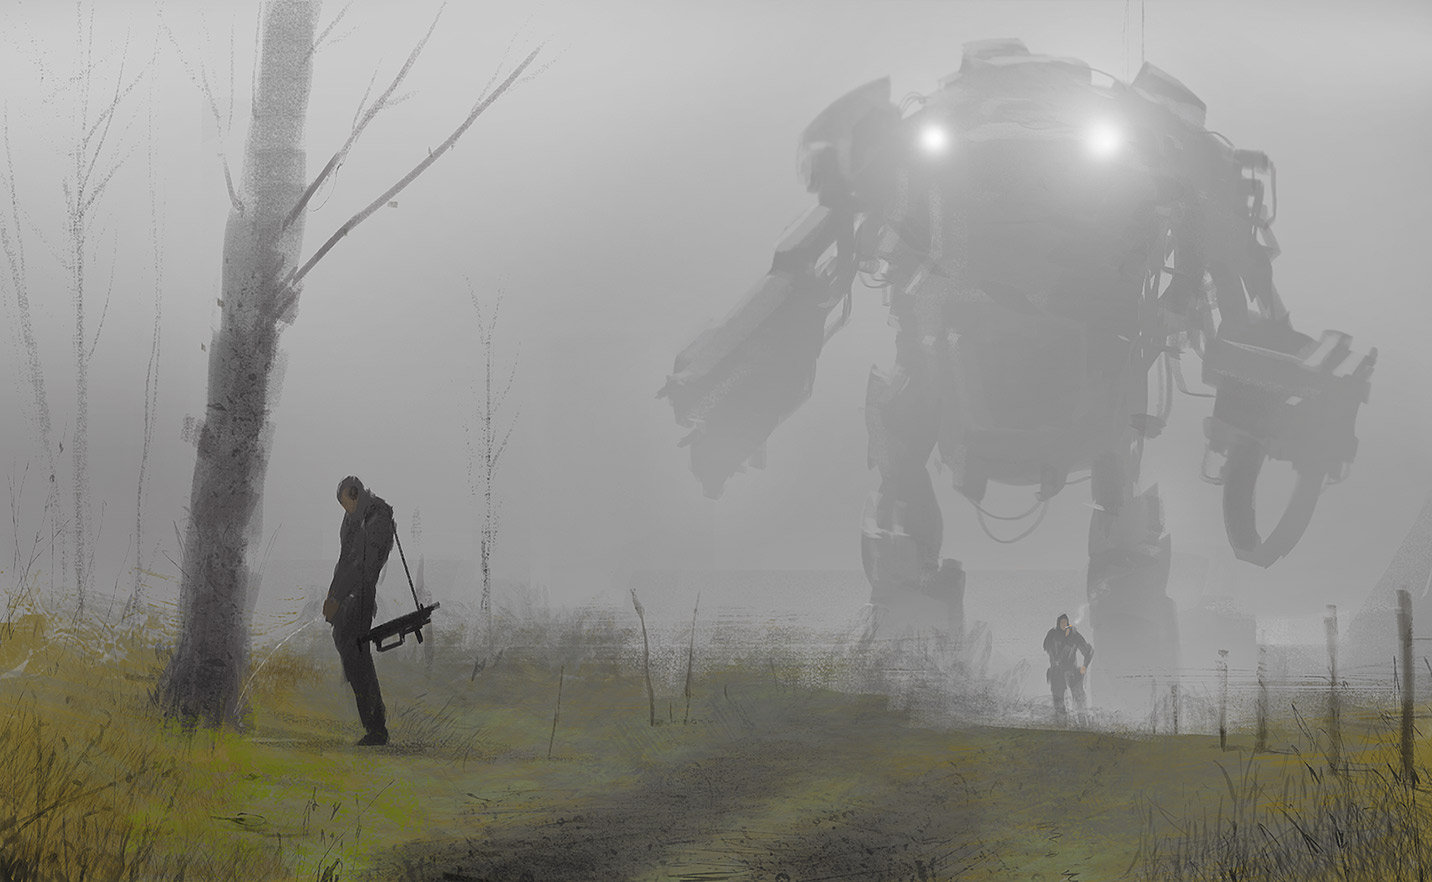 A painting of a soldier pissing in front of a giant fog-shrouded mech